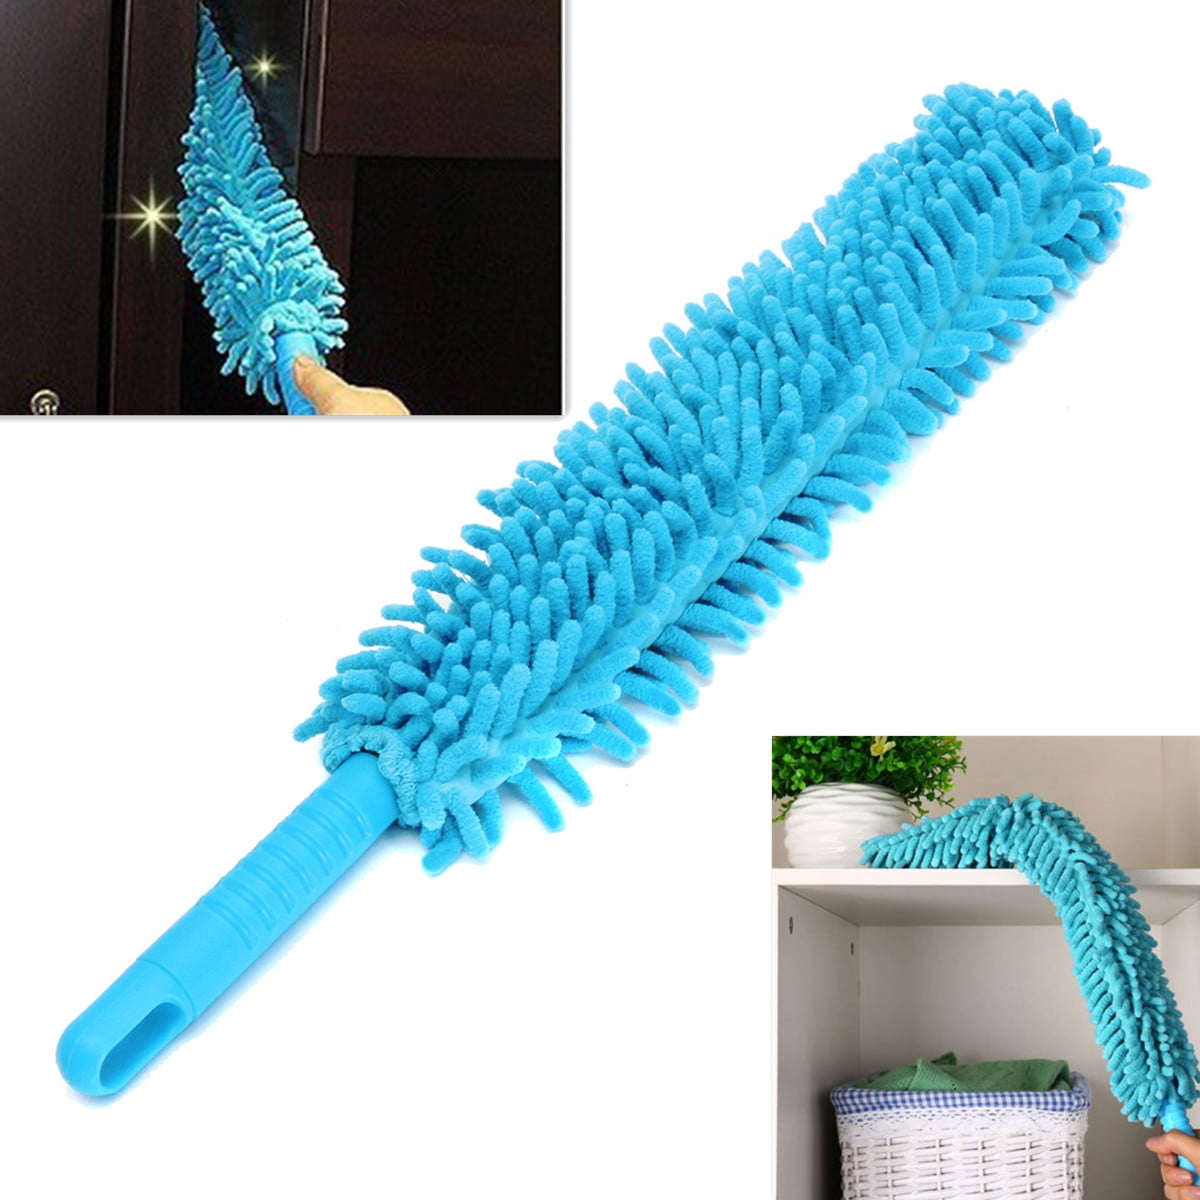 Professional Non-Scratch Brush for Wheels Bicycles shangfu-team Extendable Car Wheel Cleaning Brush Motorcycles Car Washing Brush Cleaner Tire Wheel Brush Drill Cleaning Tool Rims